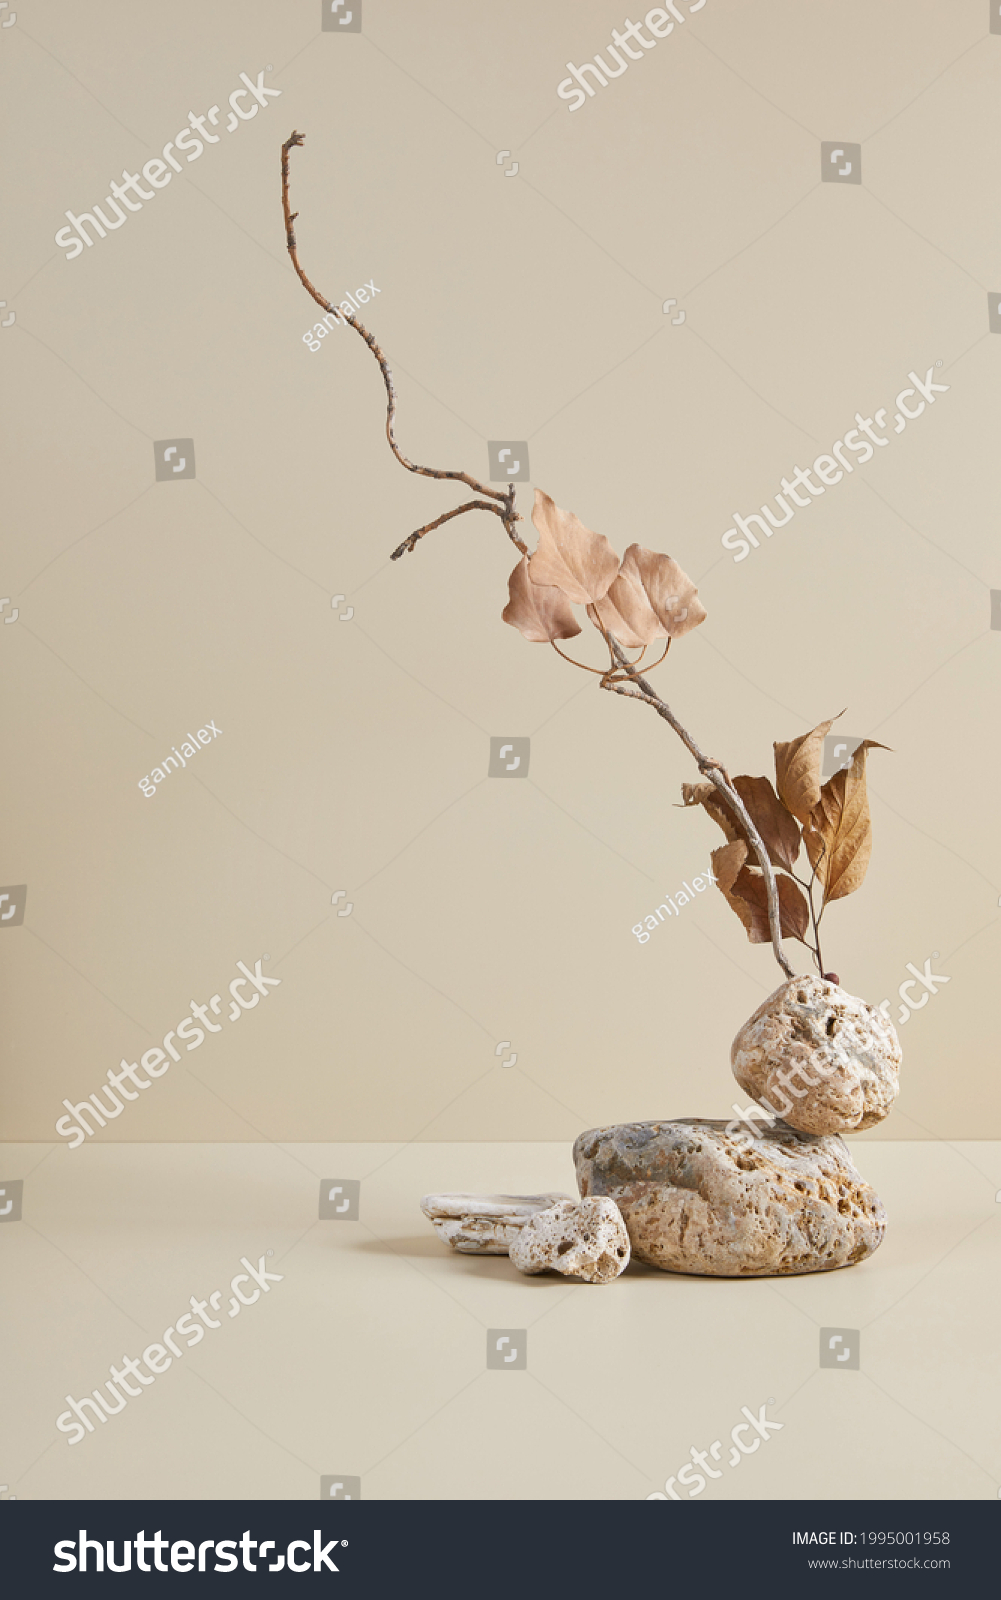 Abstract nature scene with composition of stones and dry branch. Neutral beige background for cosmetic, beauty product branding, identity and packaging. Natural pastel colors. Copy space, front view. #1995001958